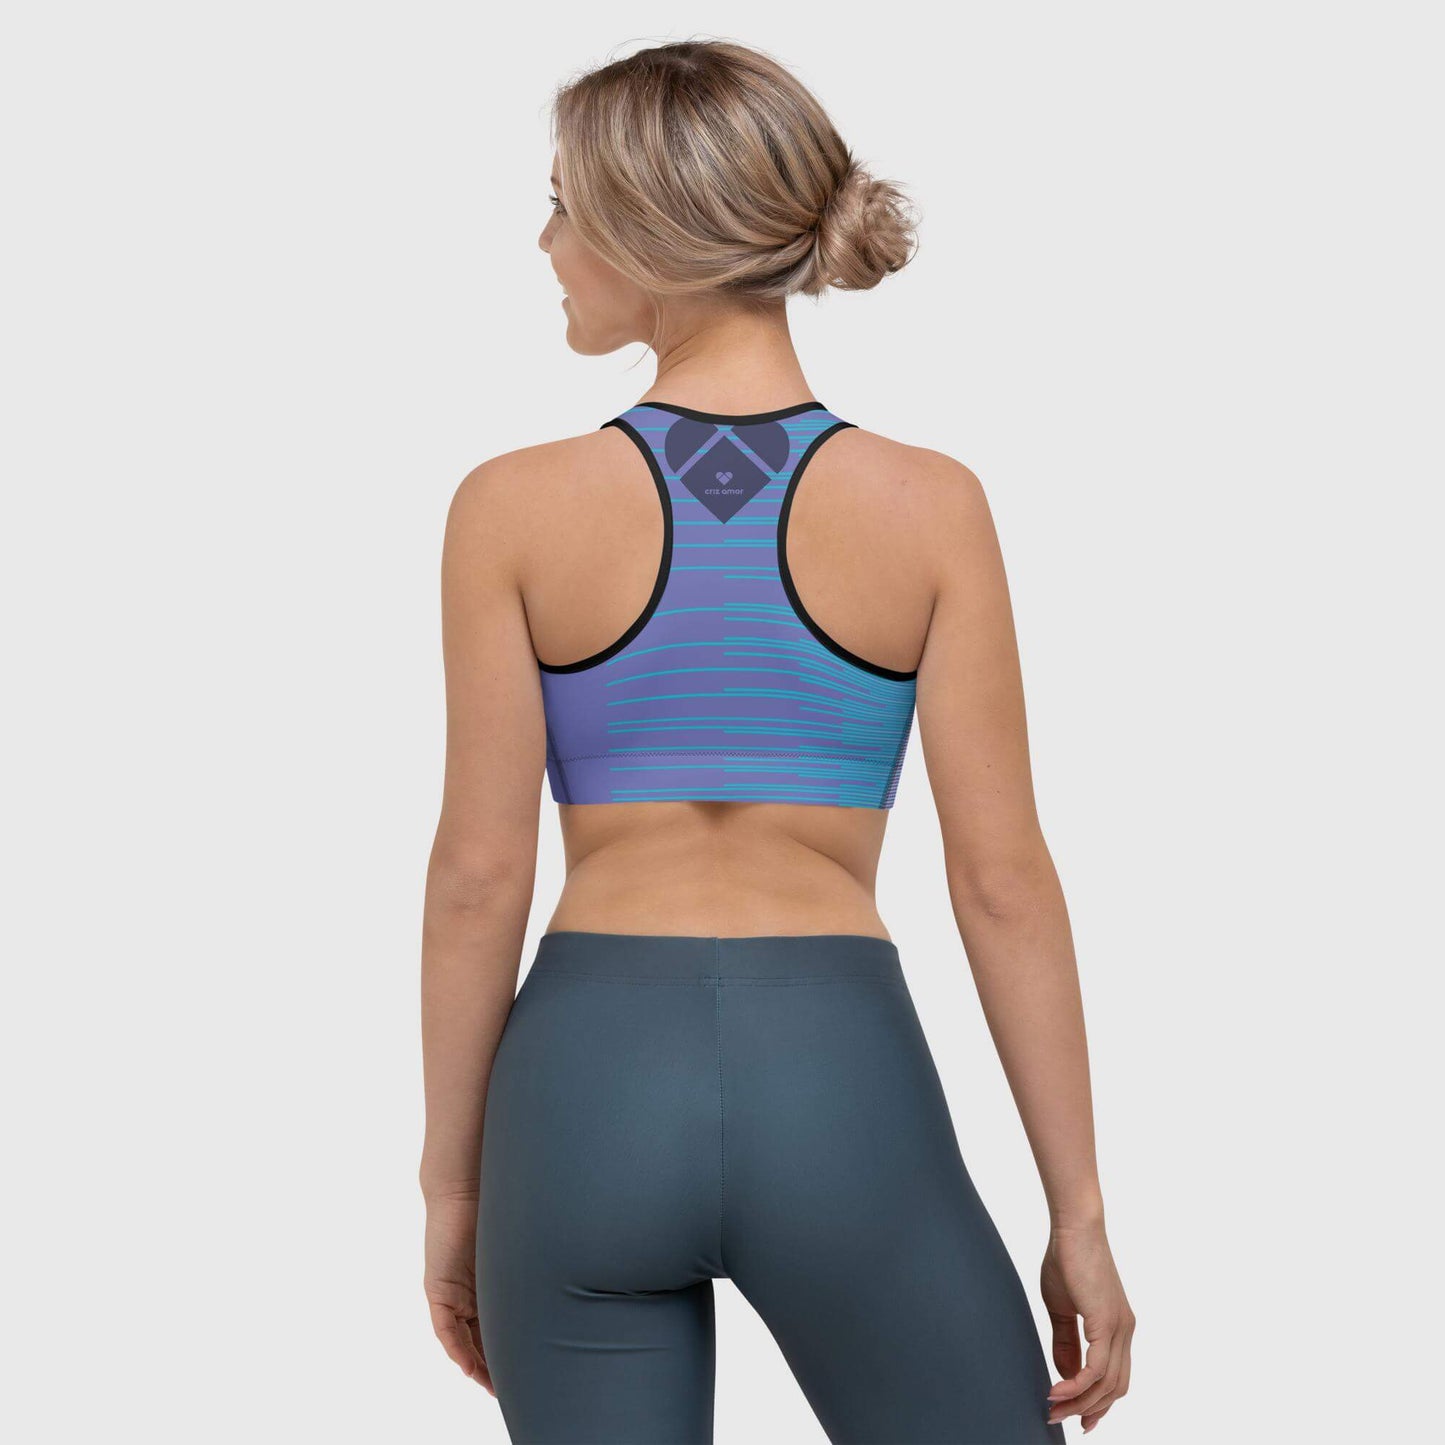 Activewear with Flair - Periwinkle Stripes Dual Sports Bra by CRiZ AMOR